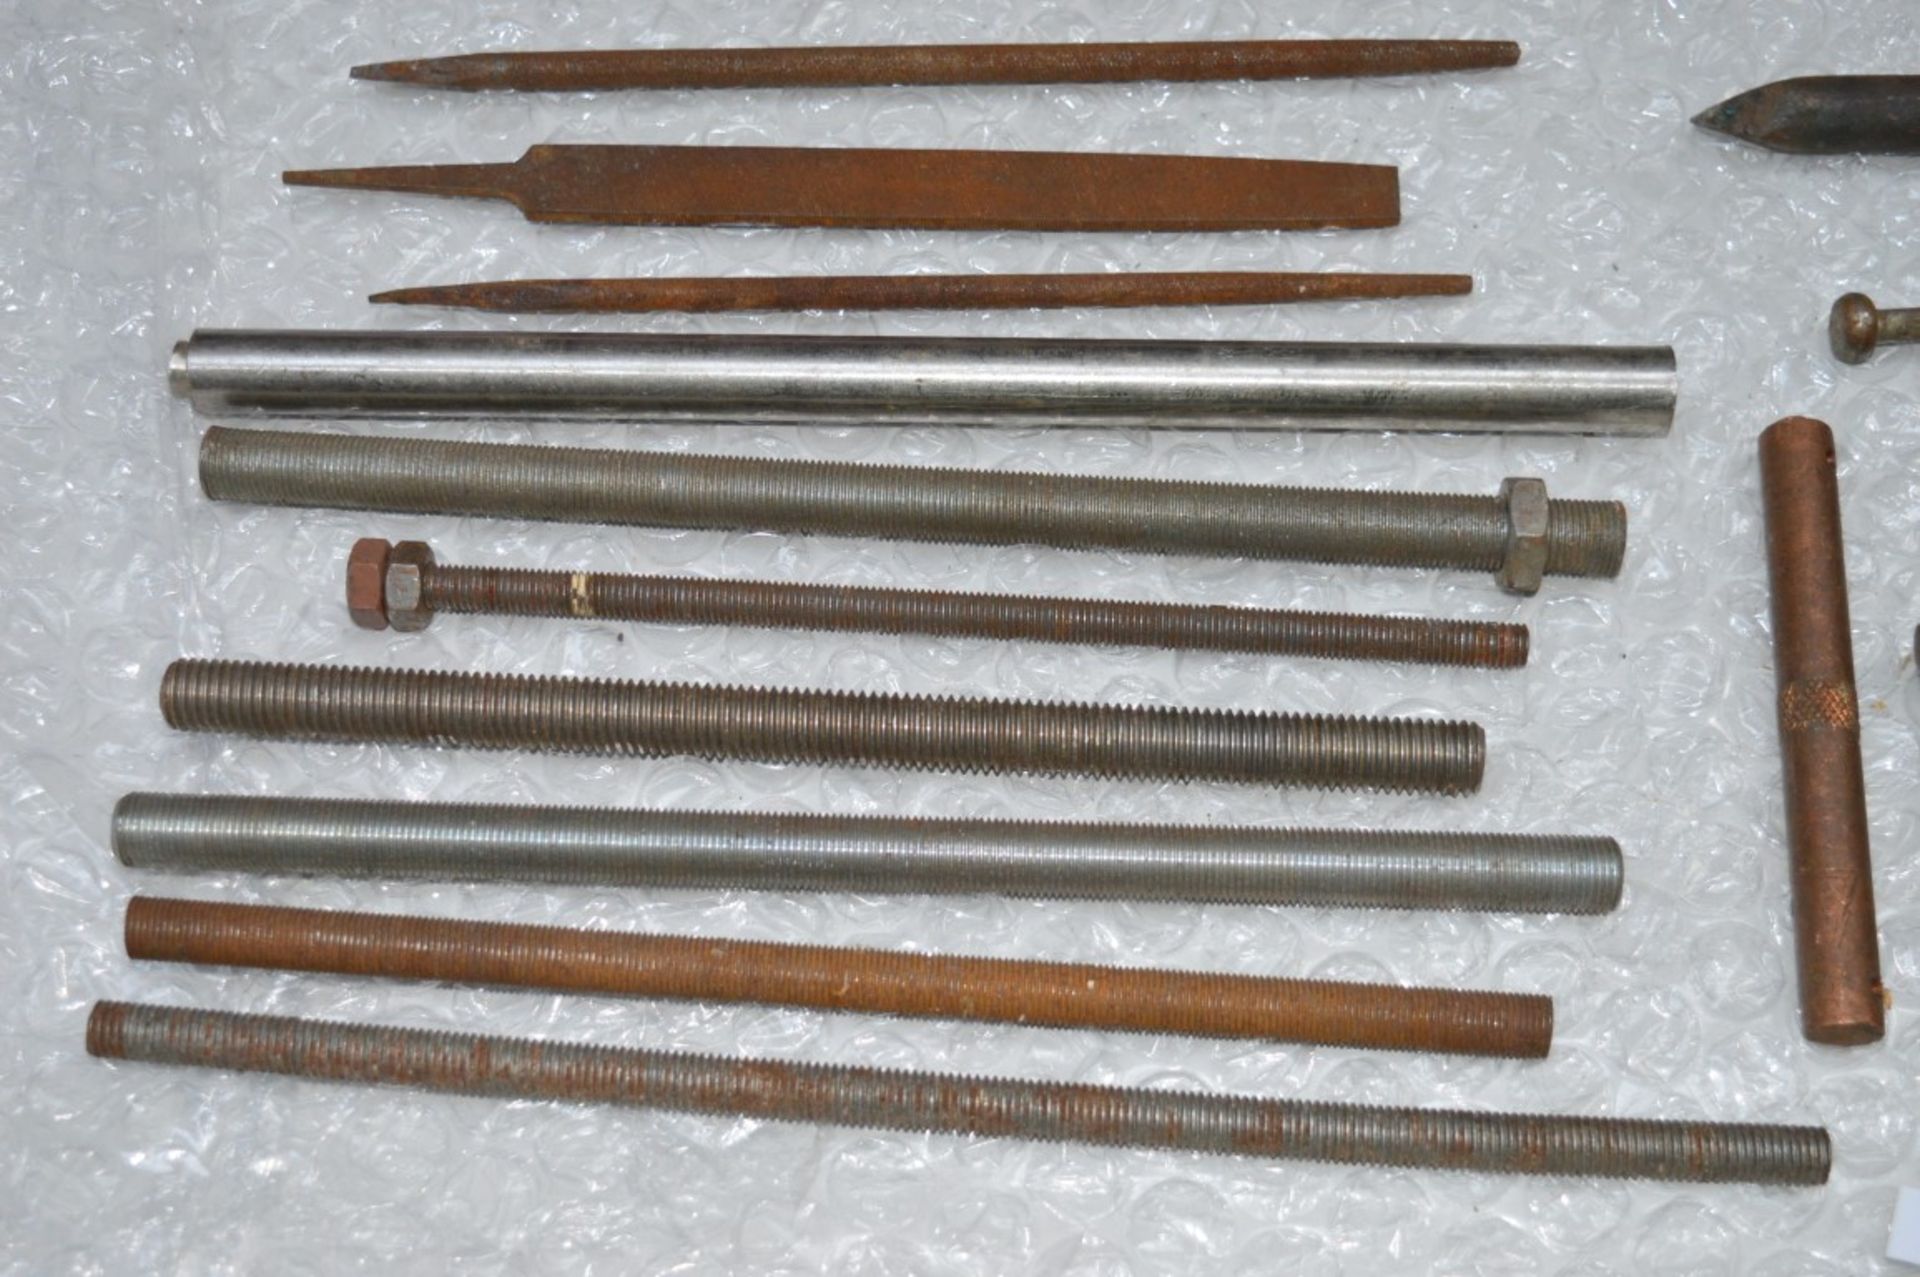 1 x Assorted Lot of Vintage Tools, Files, Rods and More - Includes More Than 30 Pieces Including - Image 22 of 31